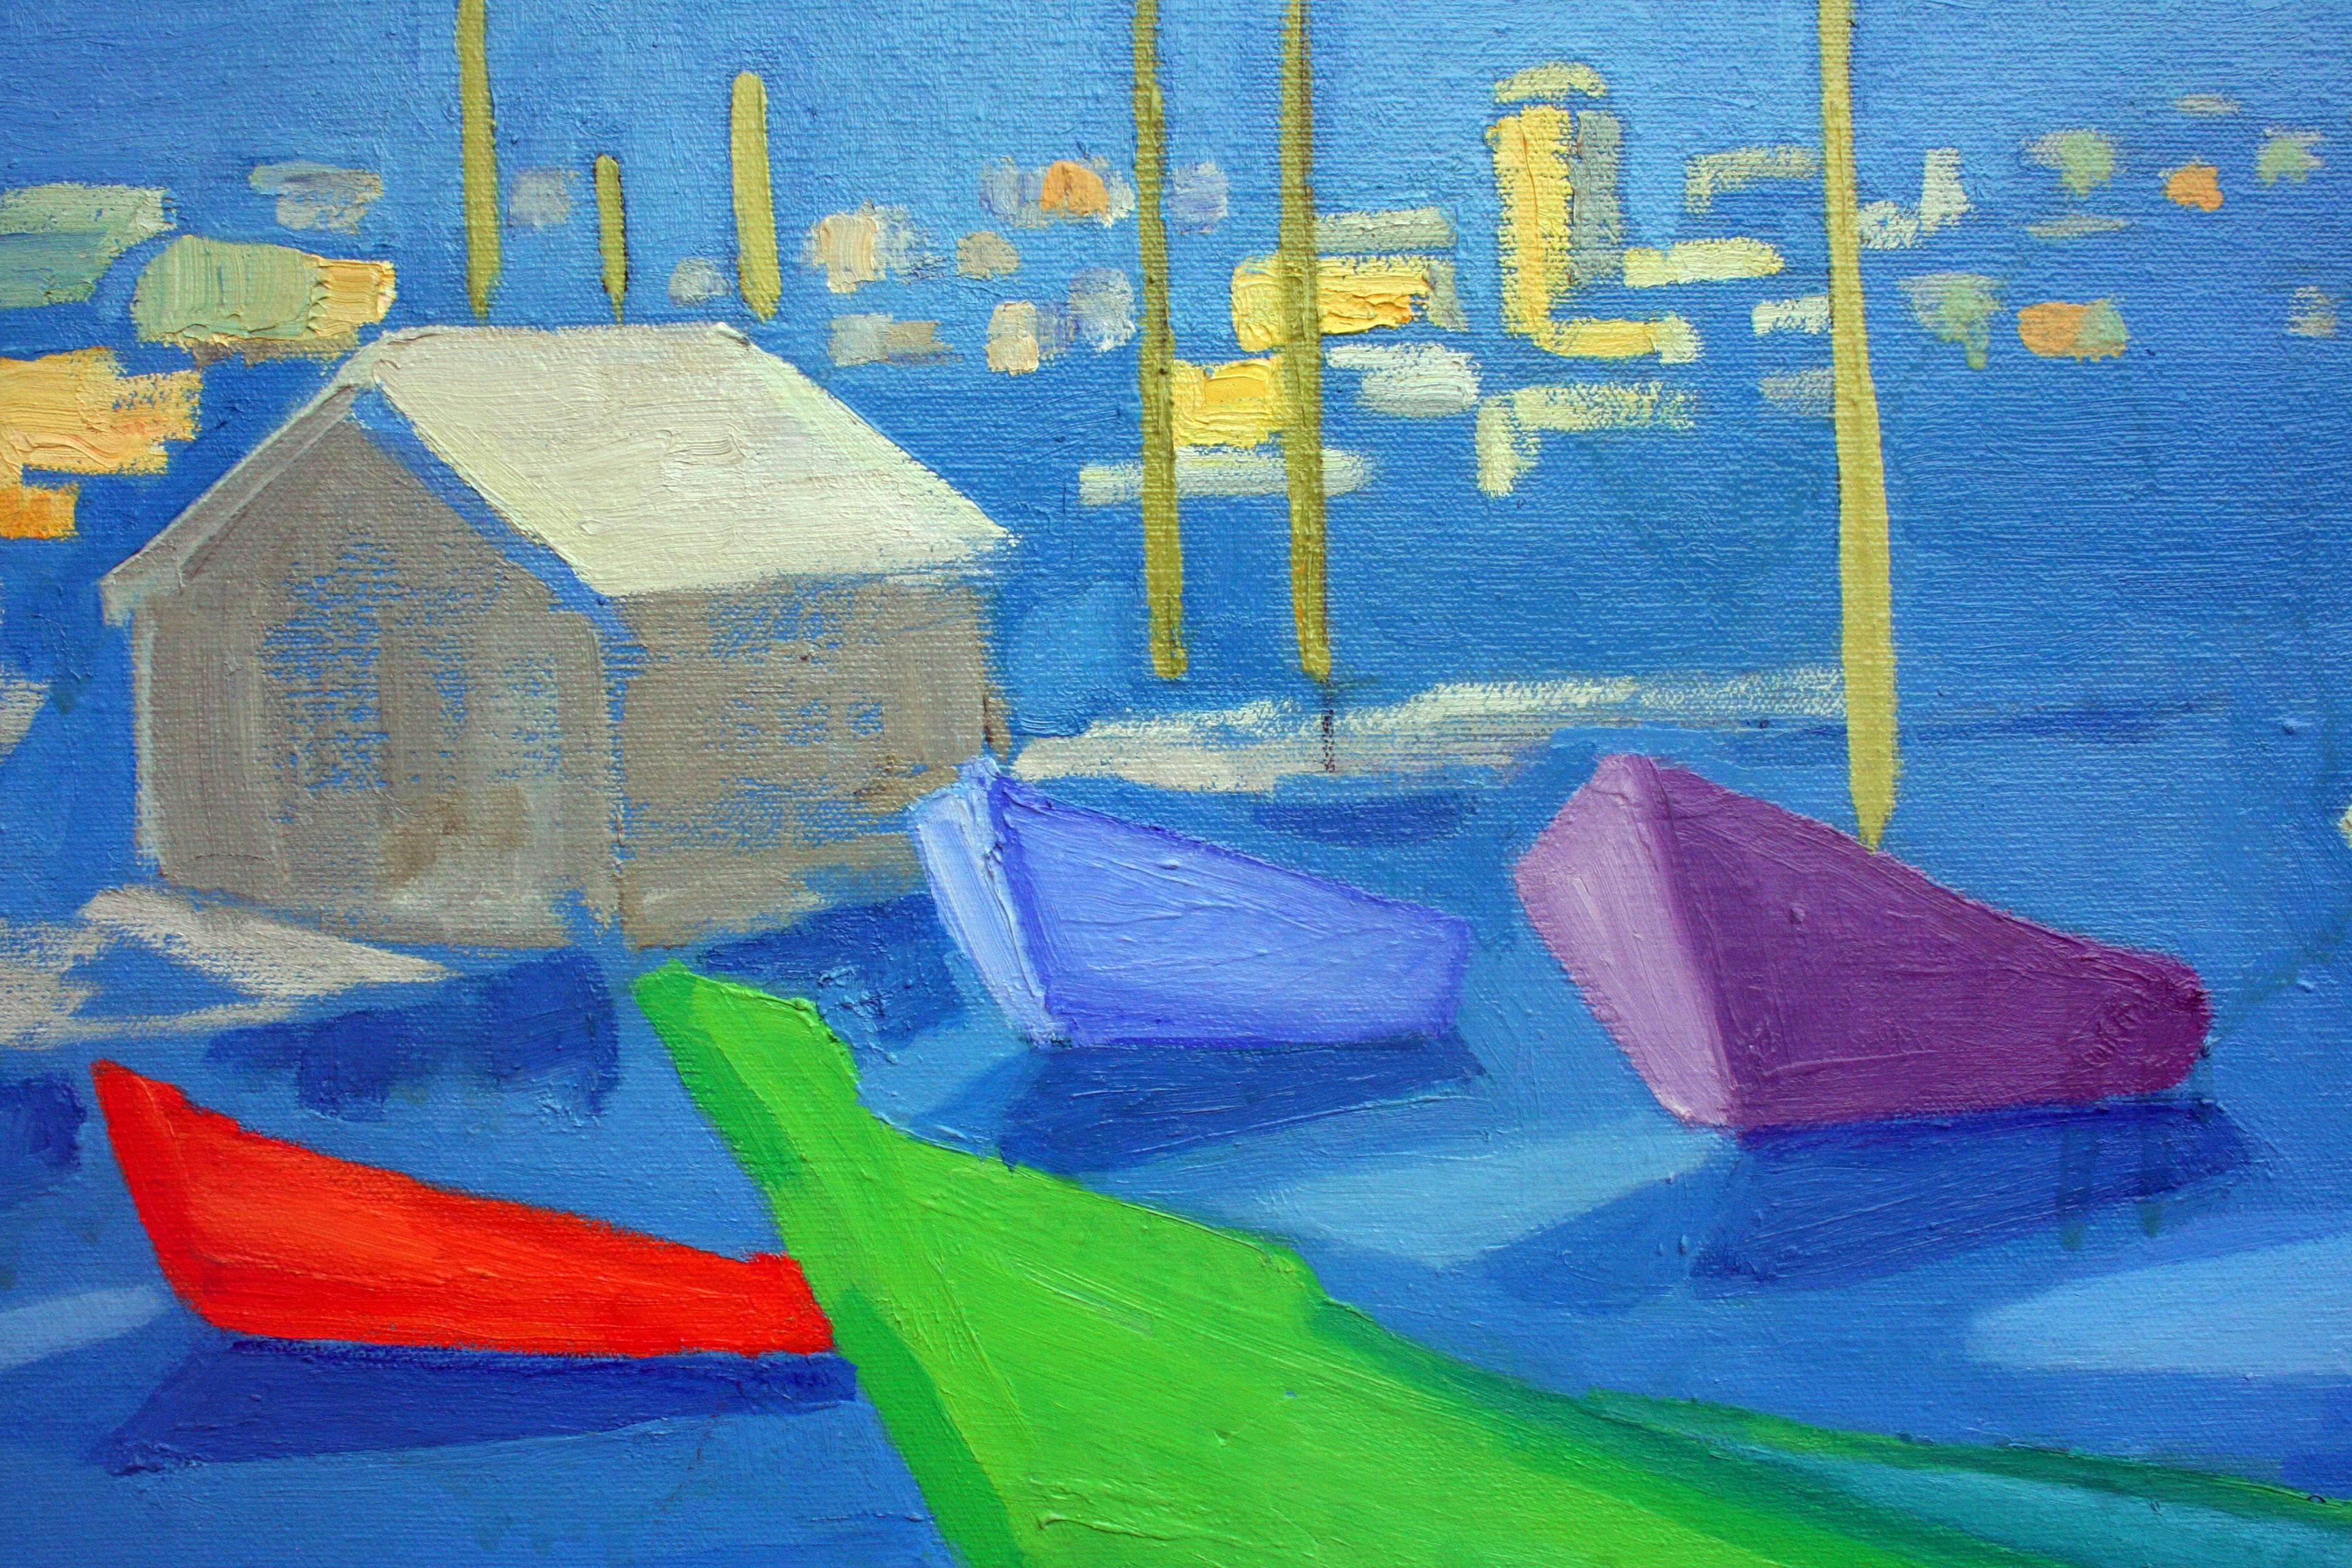 Modernist Boats - Abstract Monterey Seascape  - Painting by Virginia Rogers